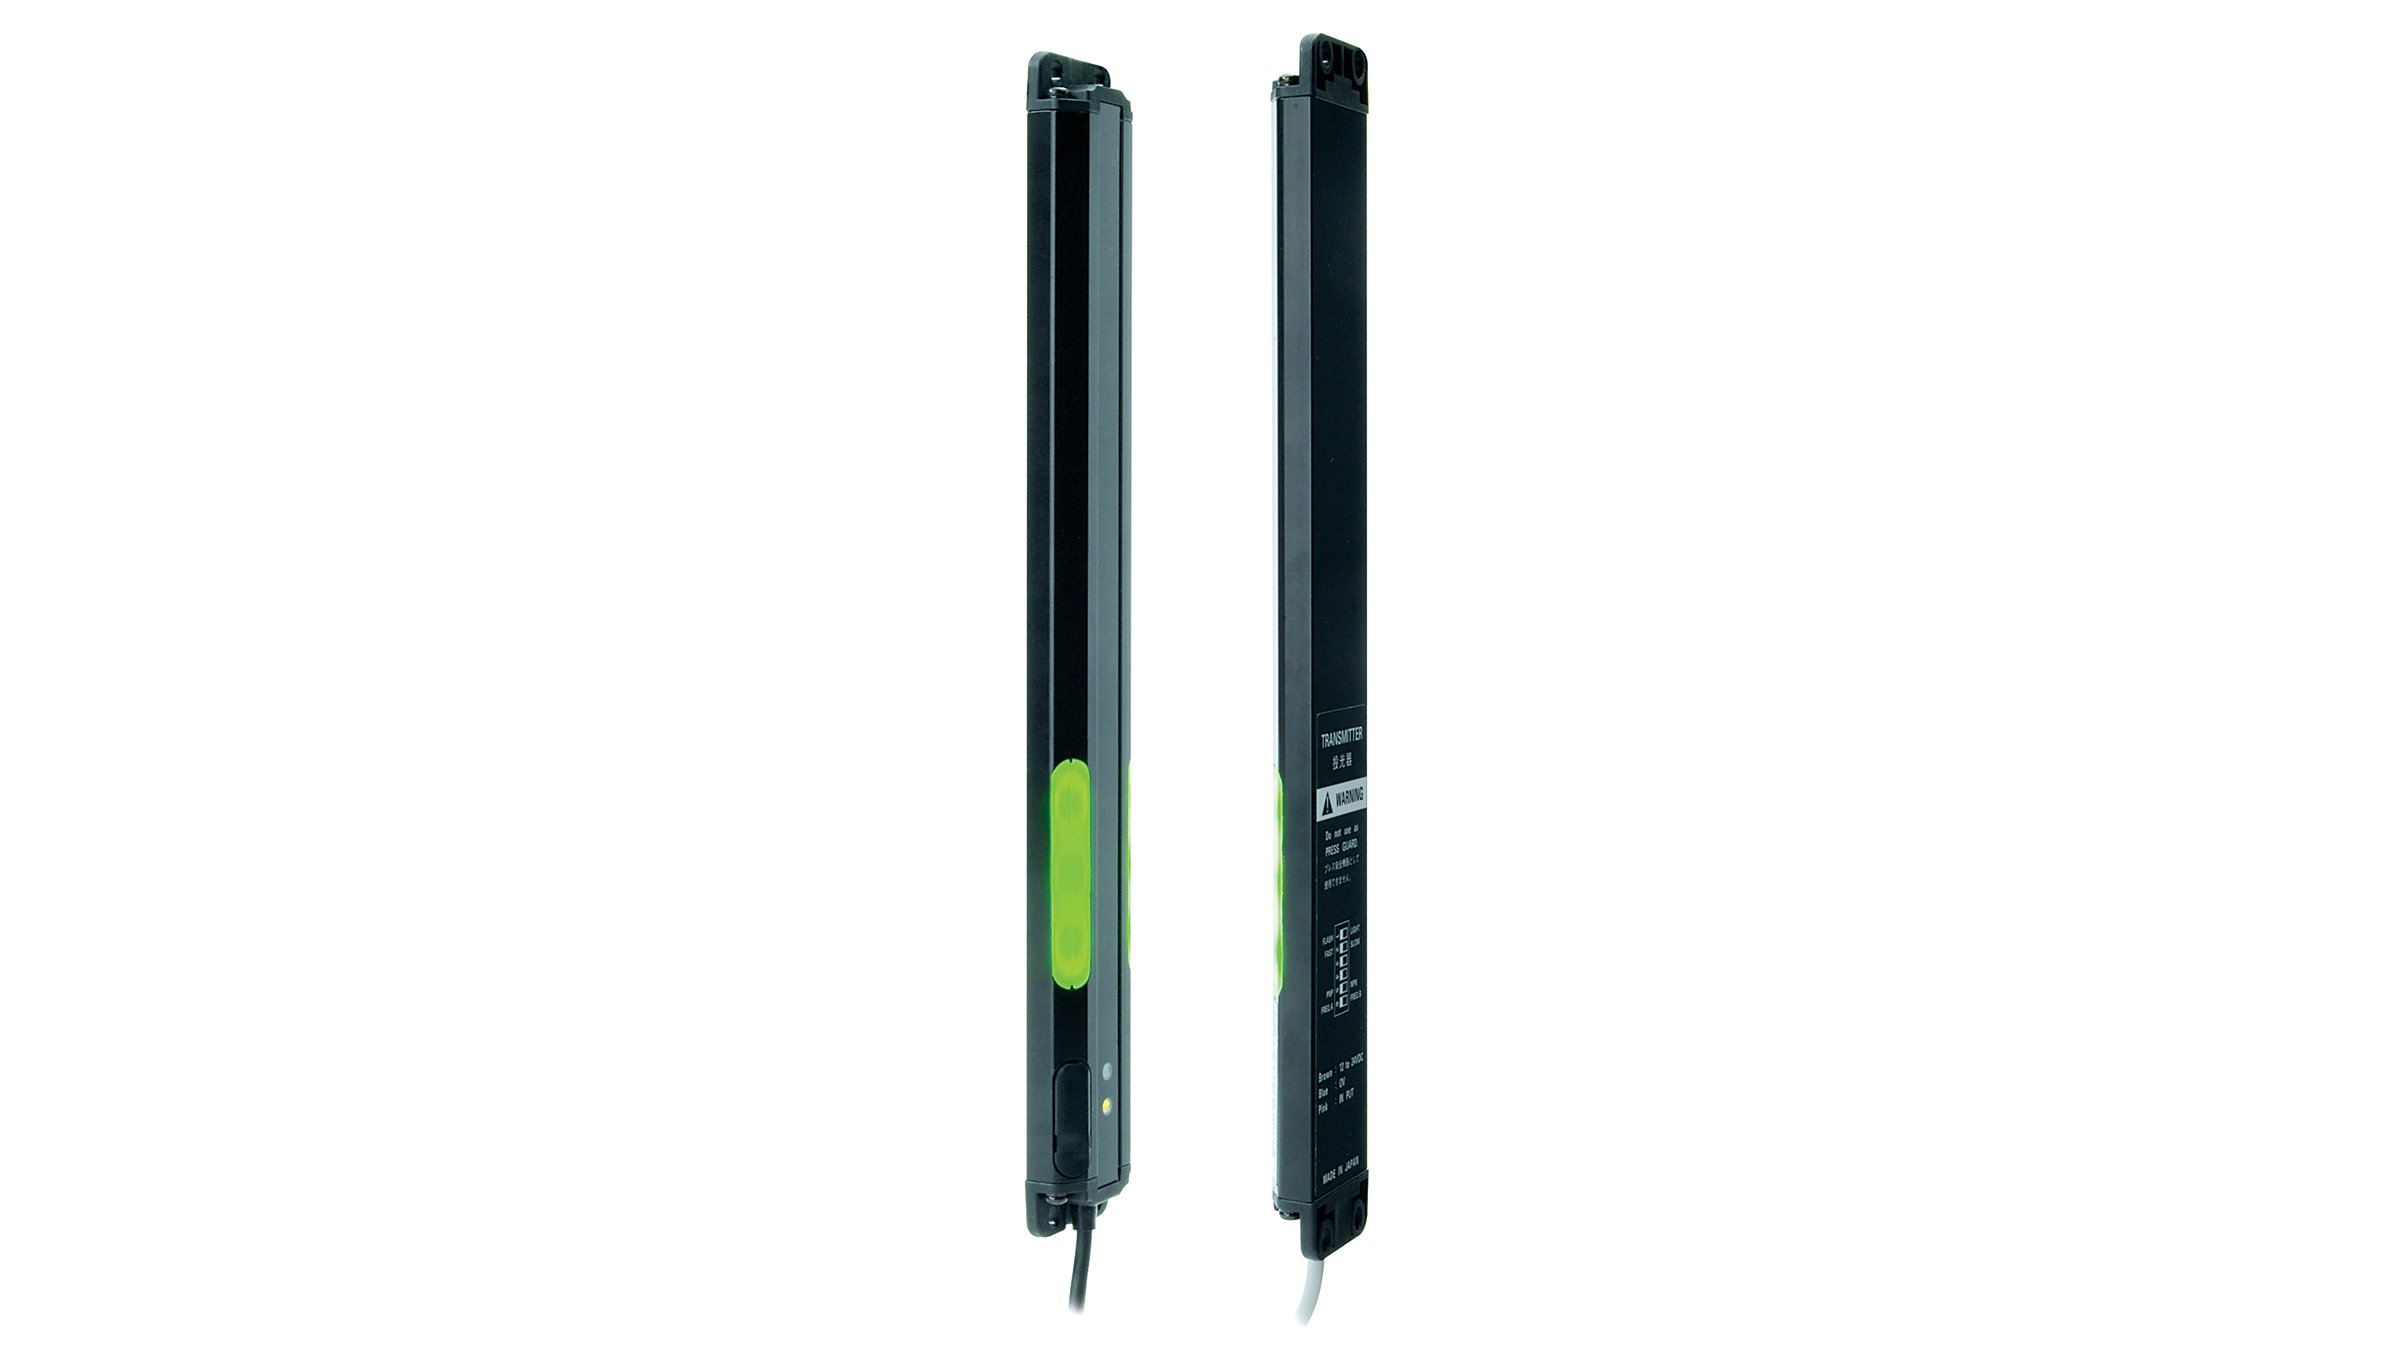 Two Allen-Bradley black, thin rectangular sensors with integrated cables.